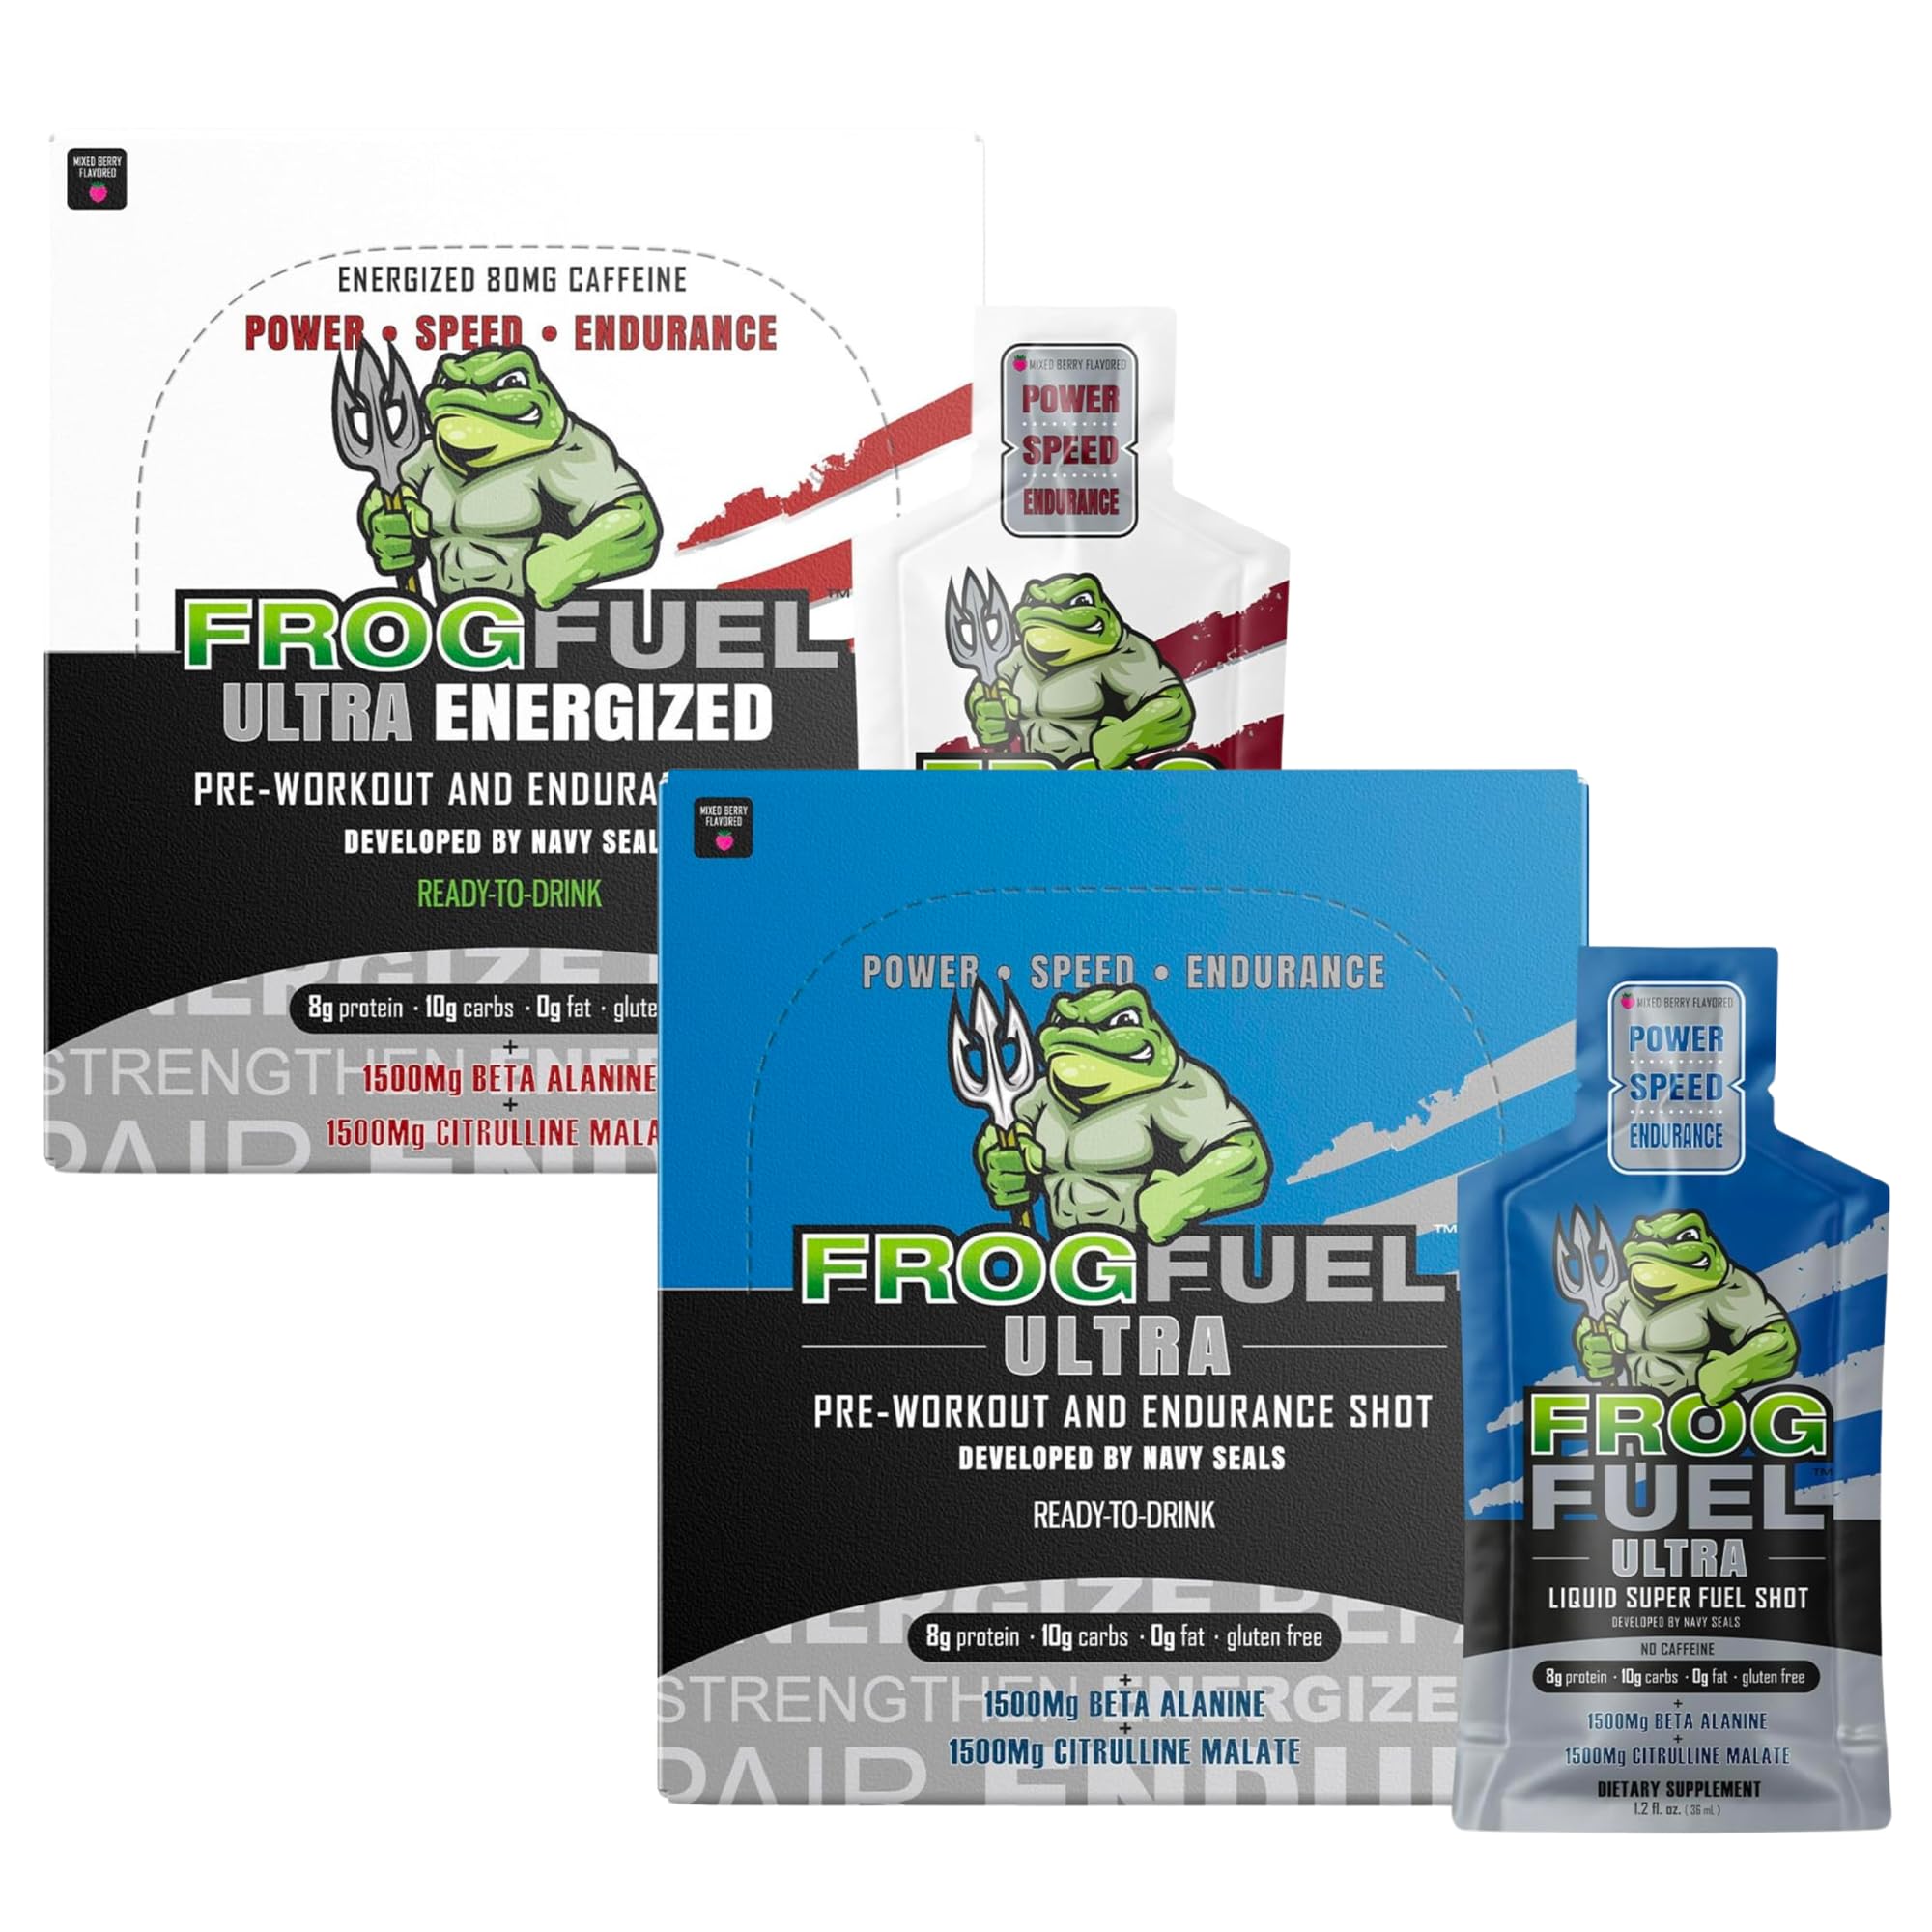 Frog Fuel Ultra & Ultra Energized Pre Workout Shot Bundle with 1500mg Beta Alanine, Electrolytes 8g Protein Nano-Hydrolyzed Grass Fed Collagen, 10g Carbs, Berry, 1.2 oz Packets, 48 Pack